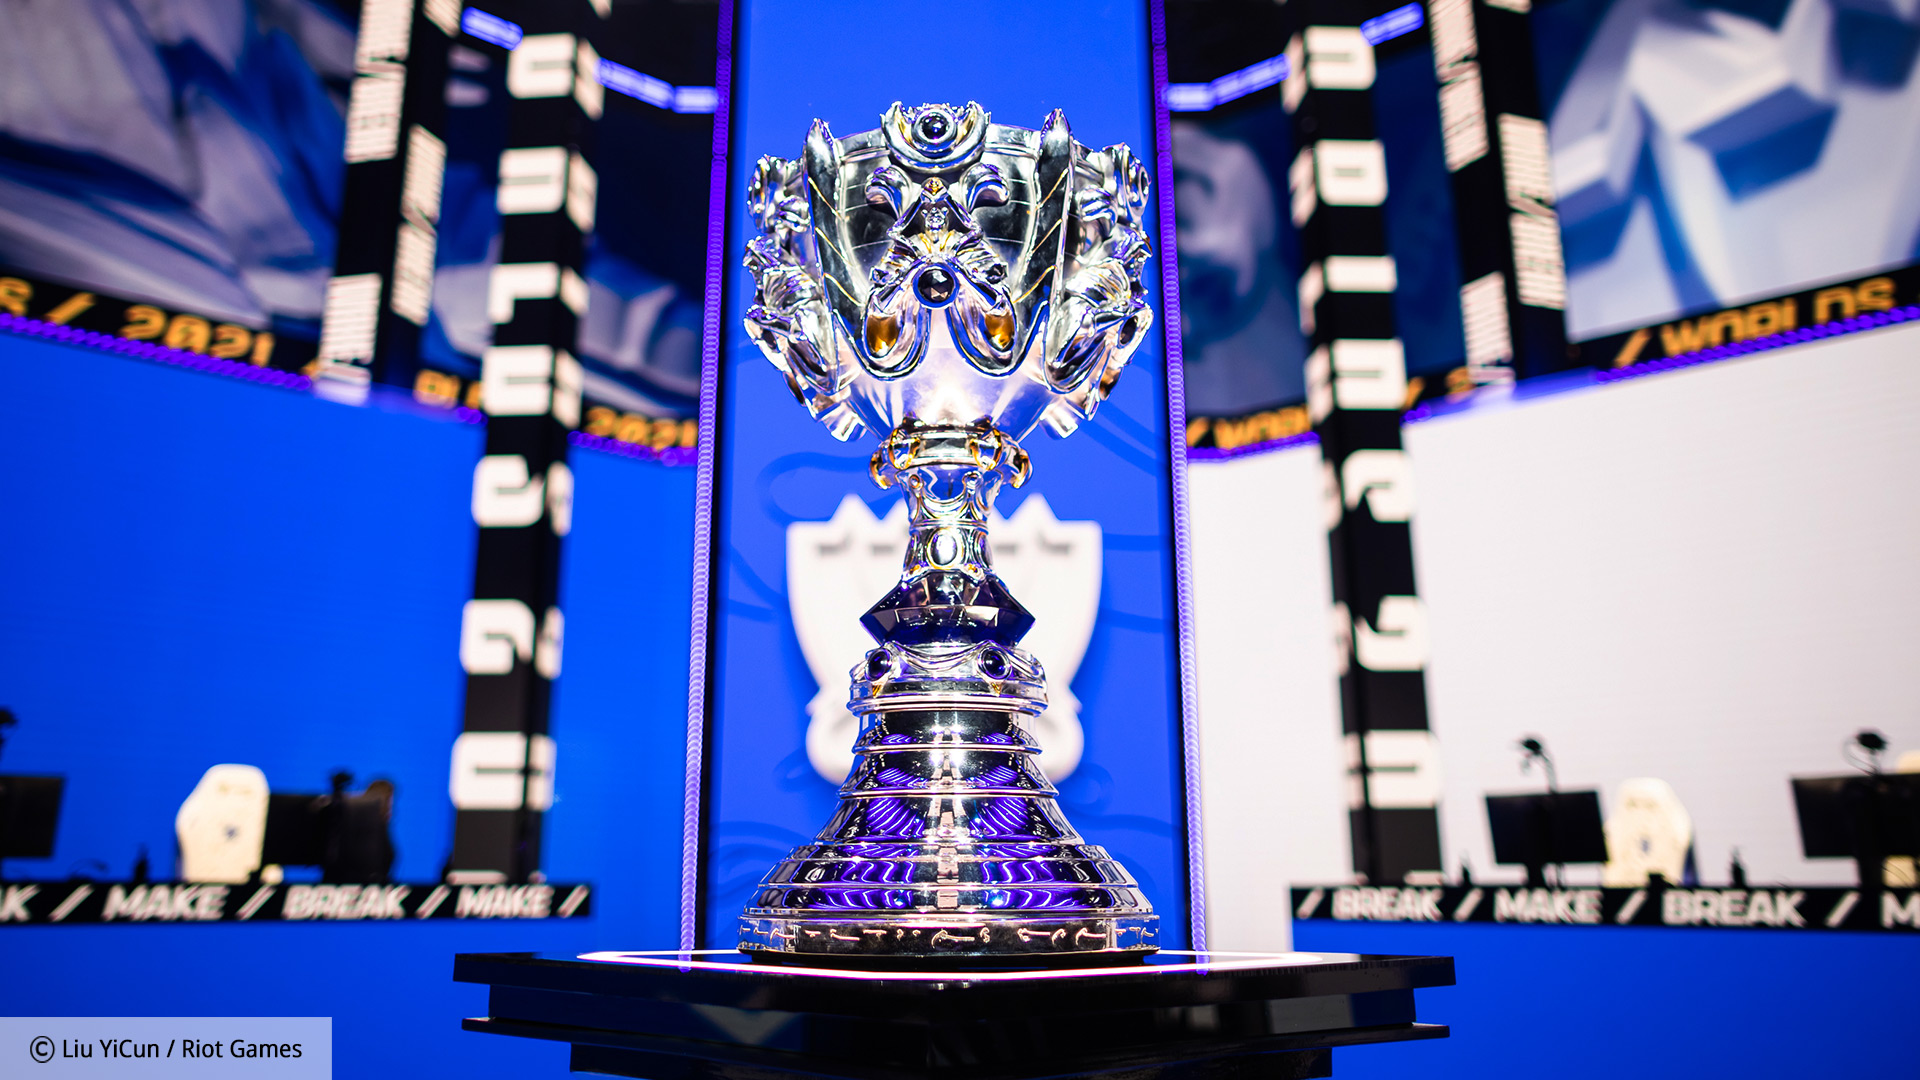 Lcs Worlds 2022 Schedule League Of Legends Worlds: Dates, Winners, Prize Pools, And More | The  Loadout